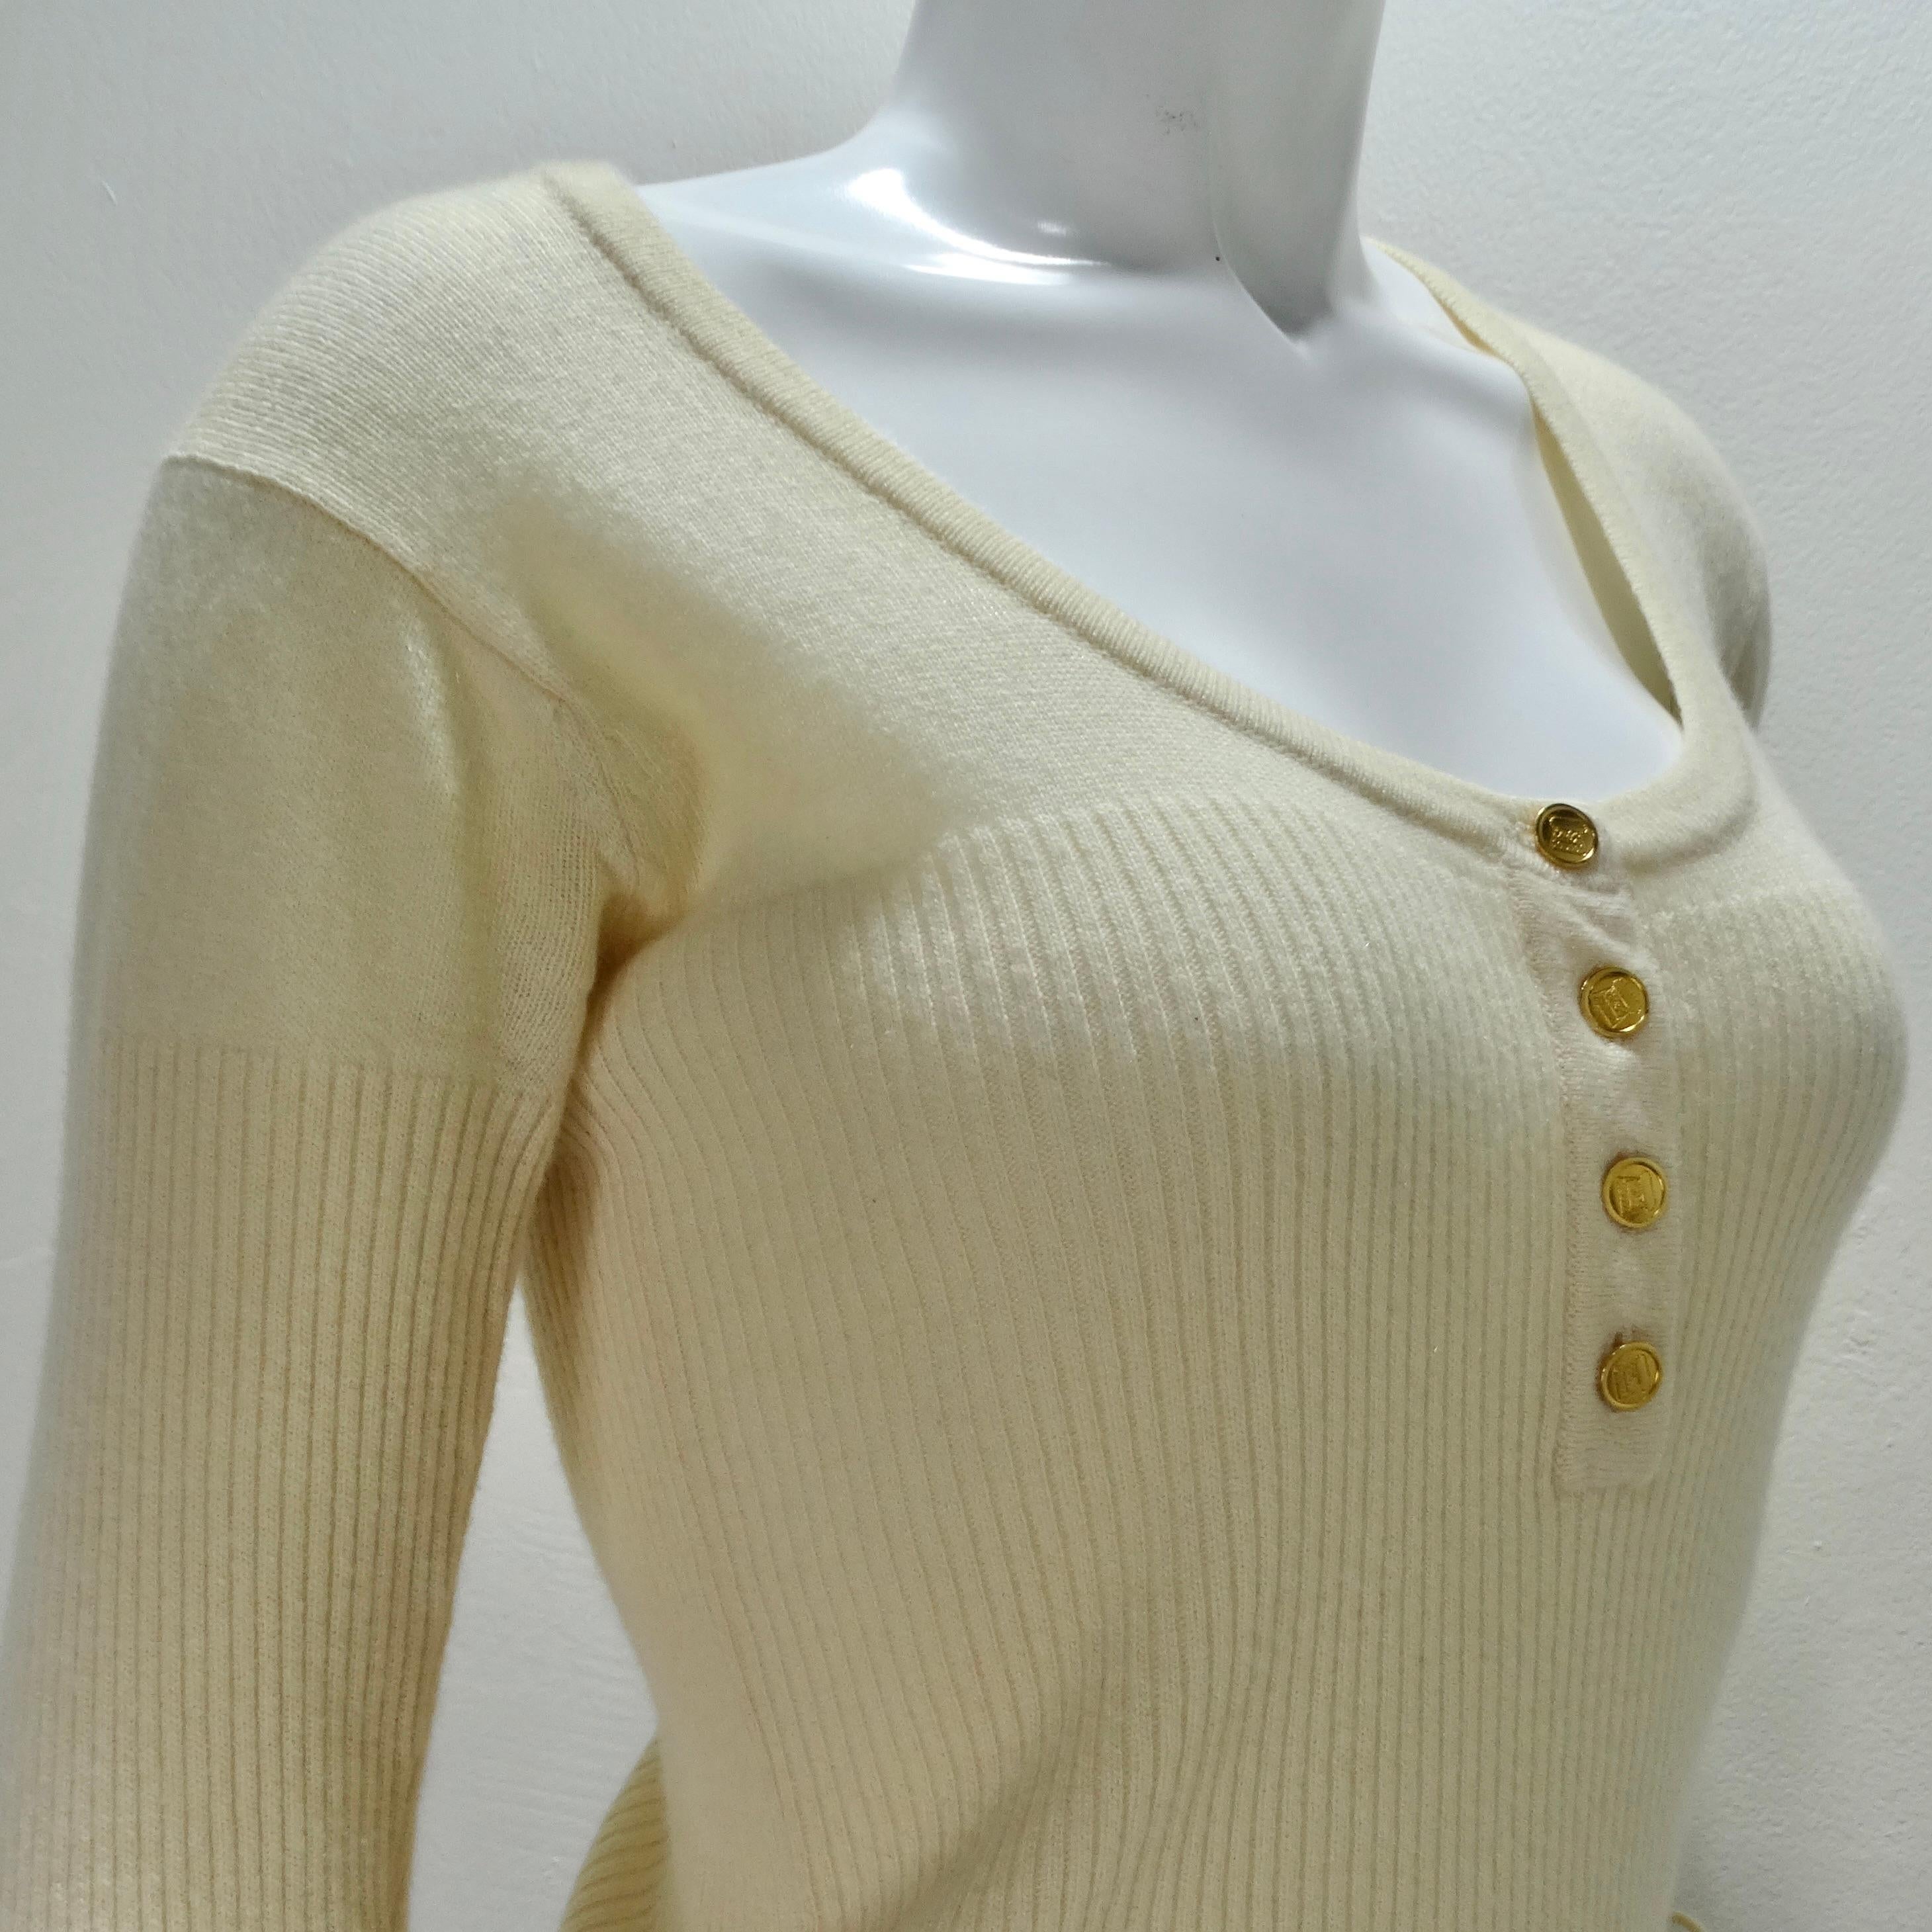 Chanel 1990s Ruffle Trim Tie Knit Cashmere Sweater  For Sale 4